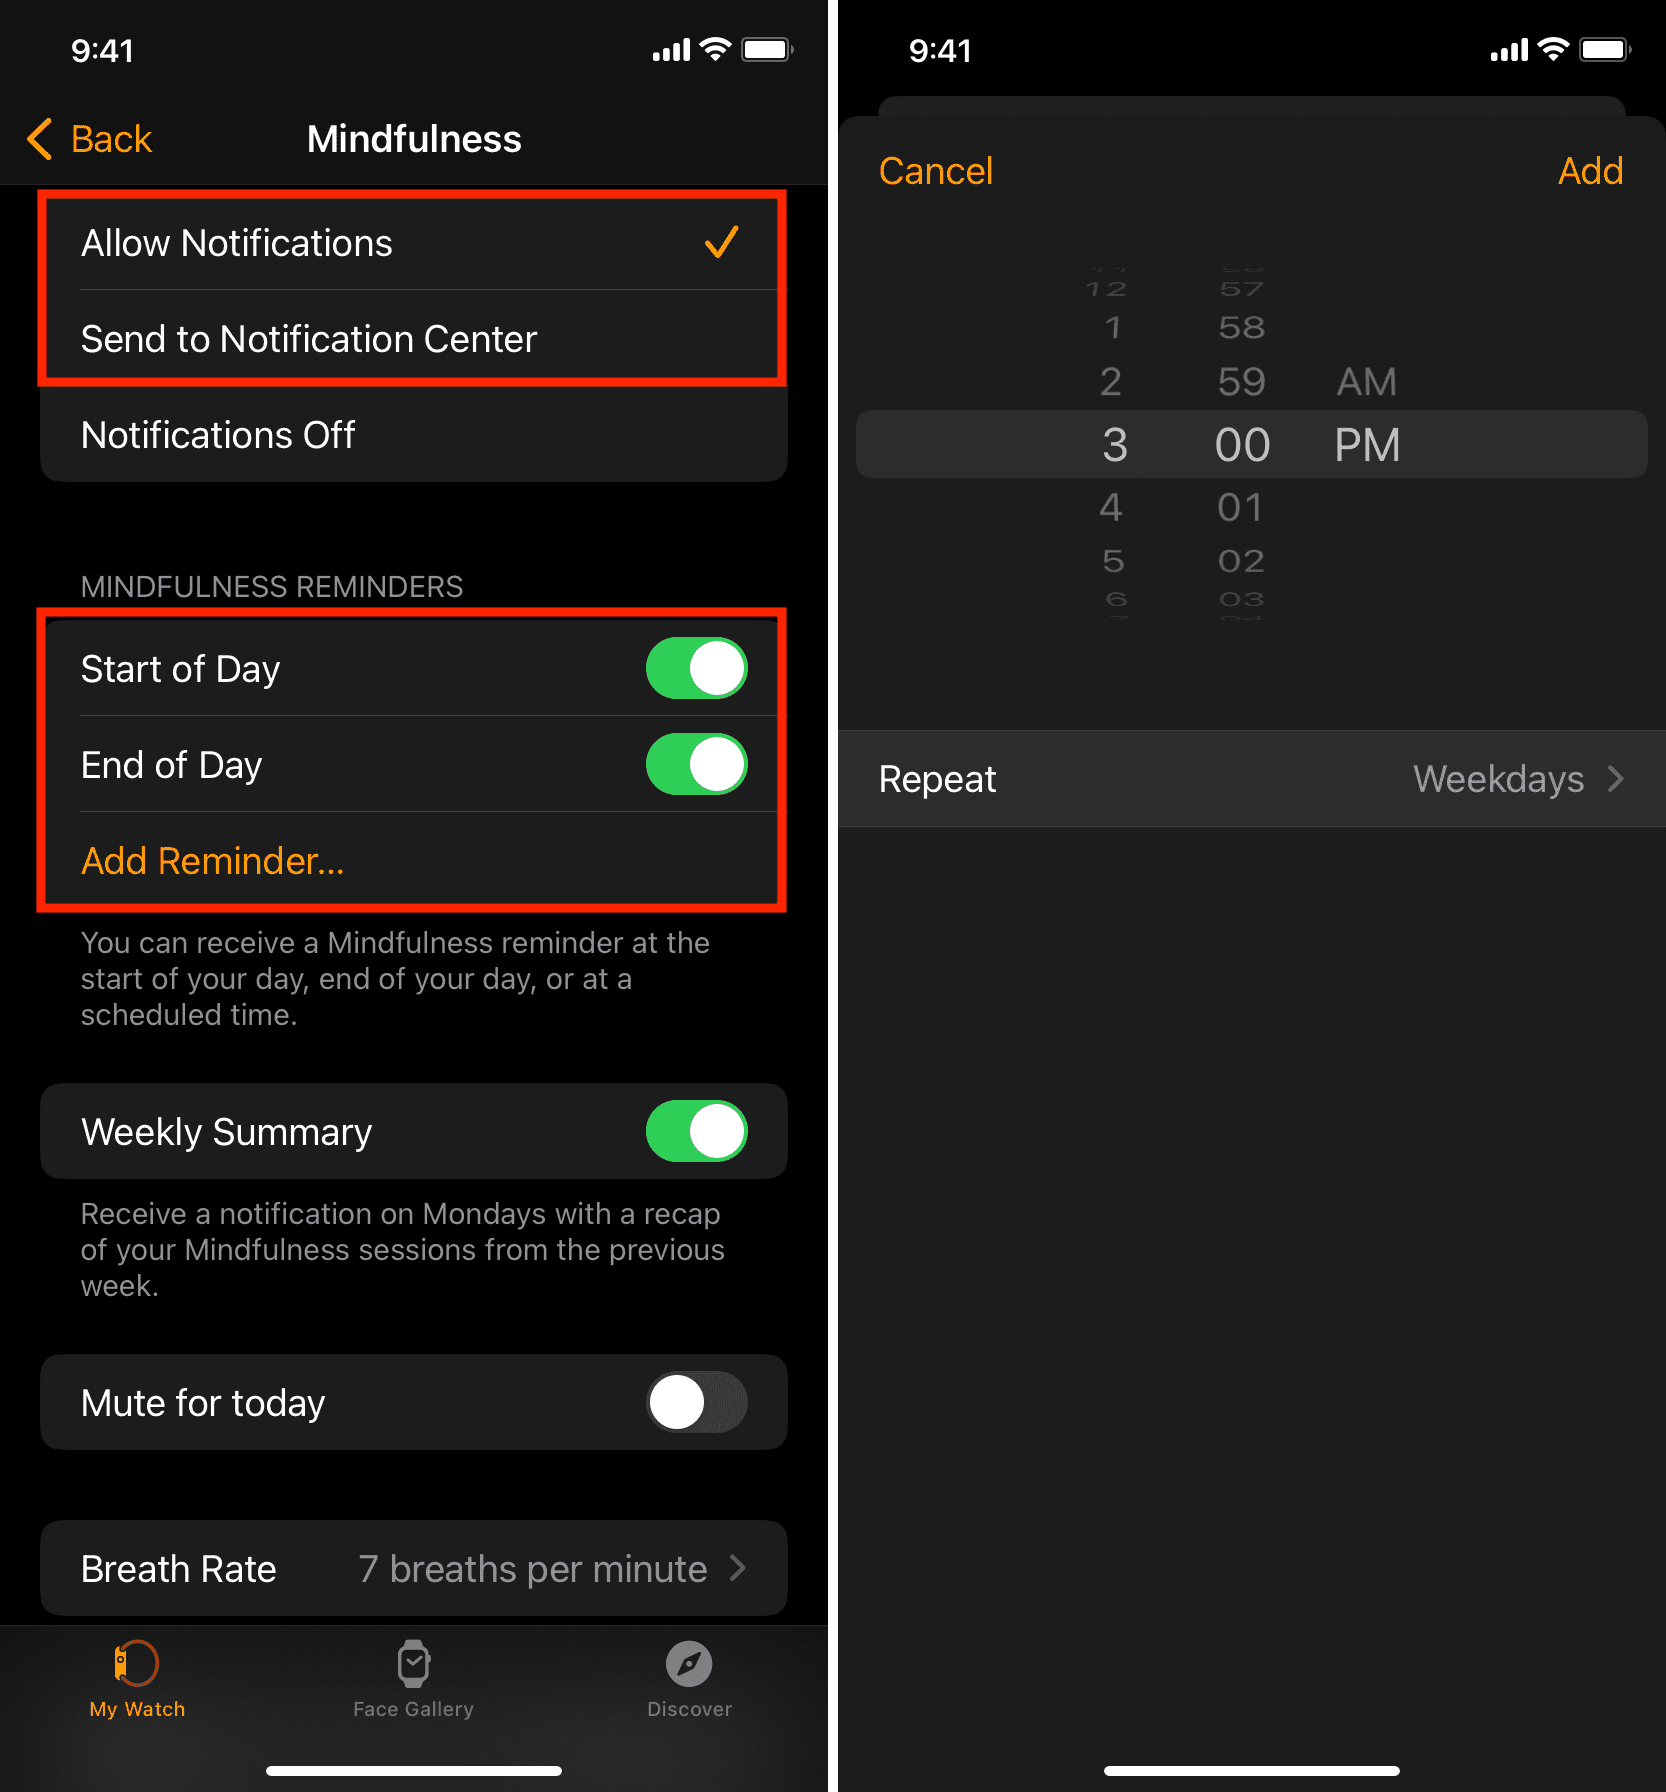 Enable Mindfulness notifications for Apple Watch